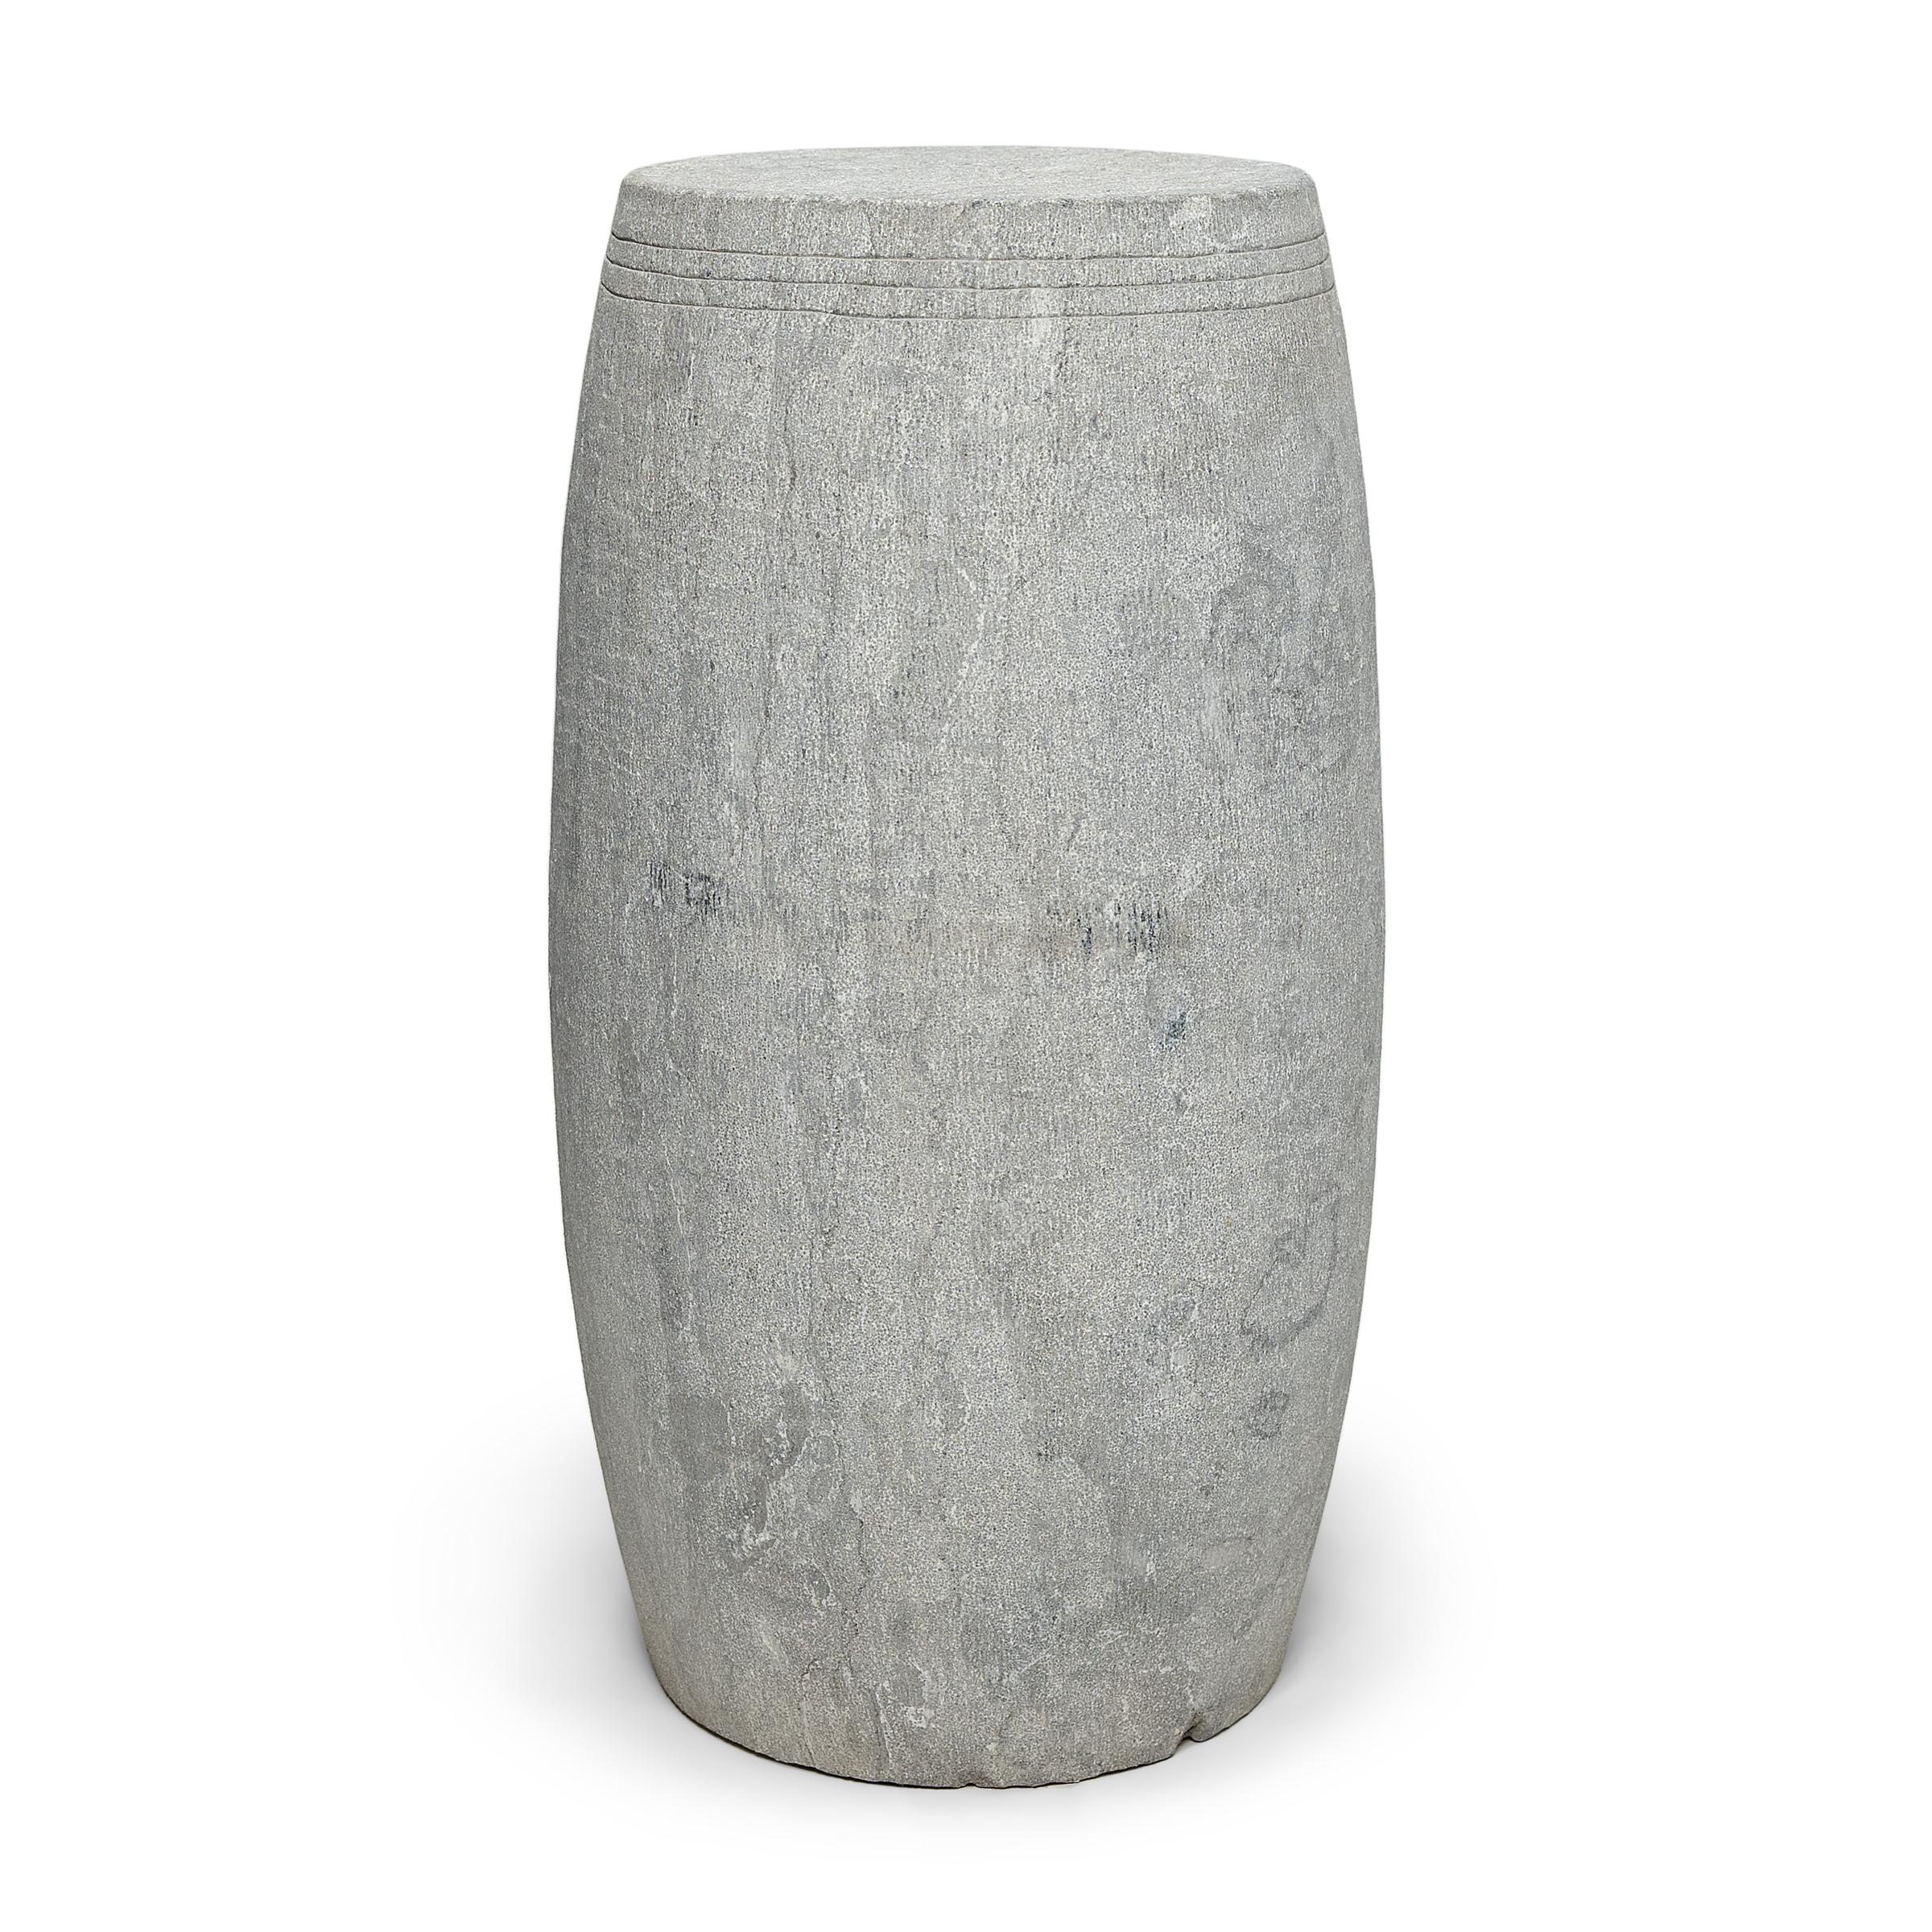 This narrow drum stool was carved from a solid block of limestone with a minimalist tapered design. The stool is subtly etched with thin grooves around the top, suggestive of the lines drawn by stretched hide on an actual drum. Traditionally used as